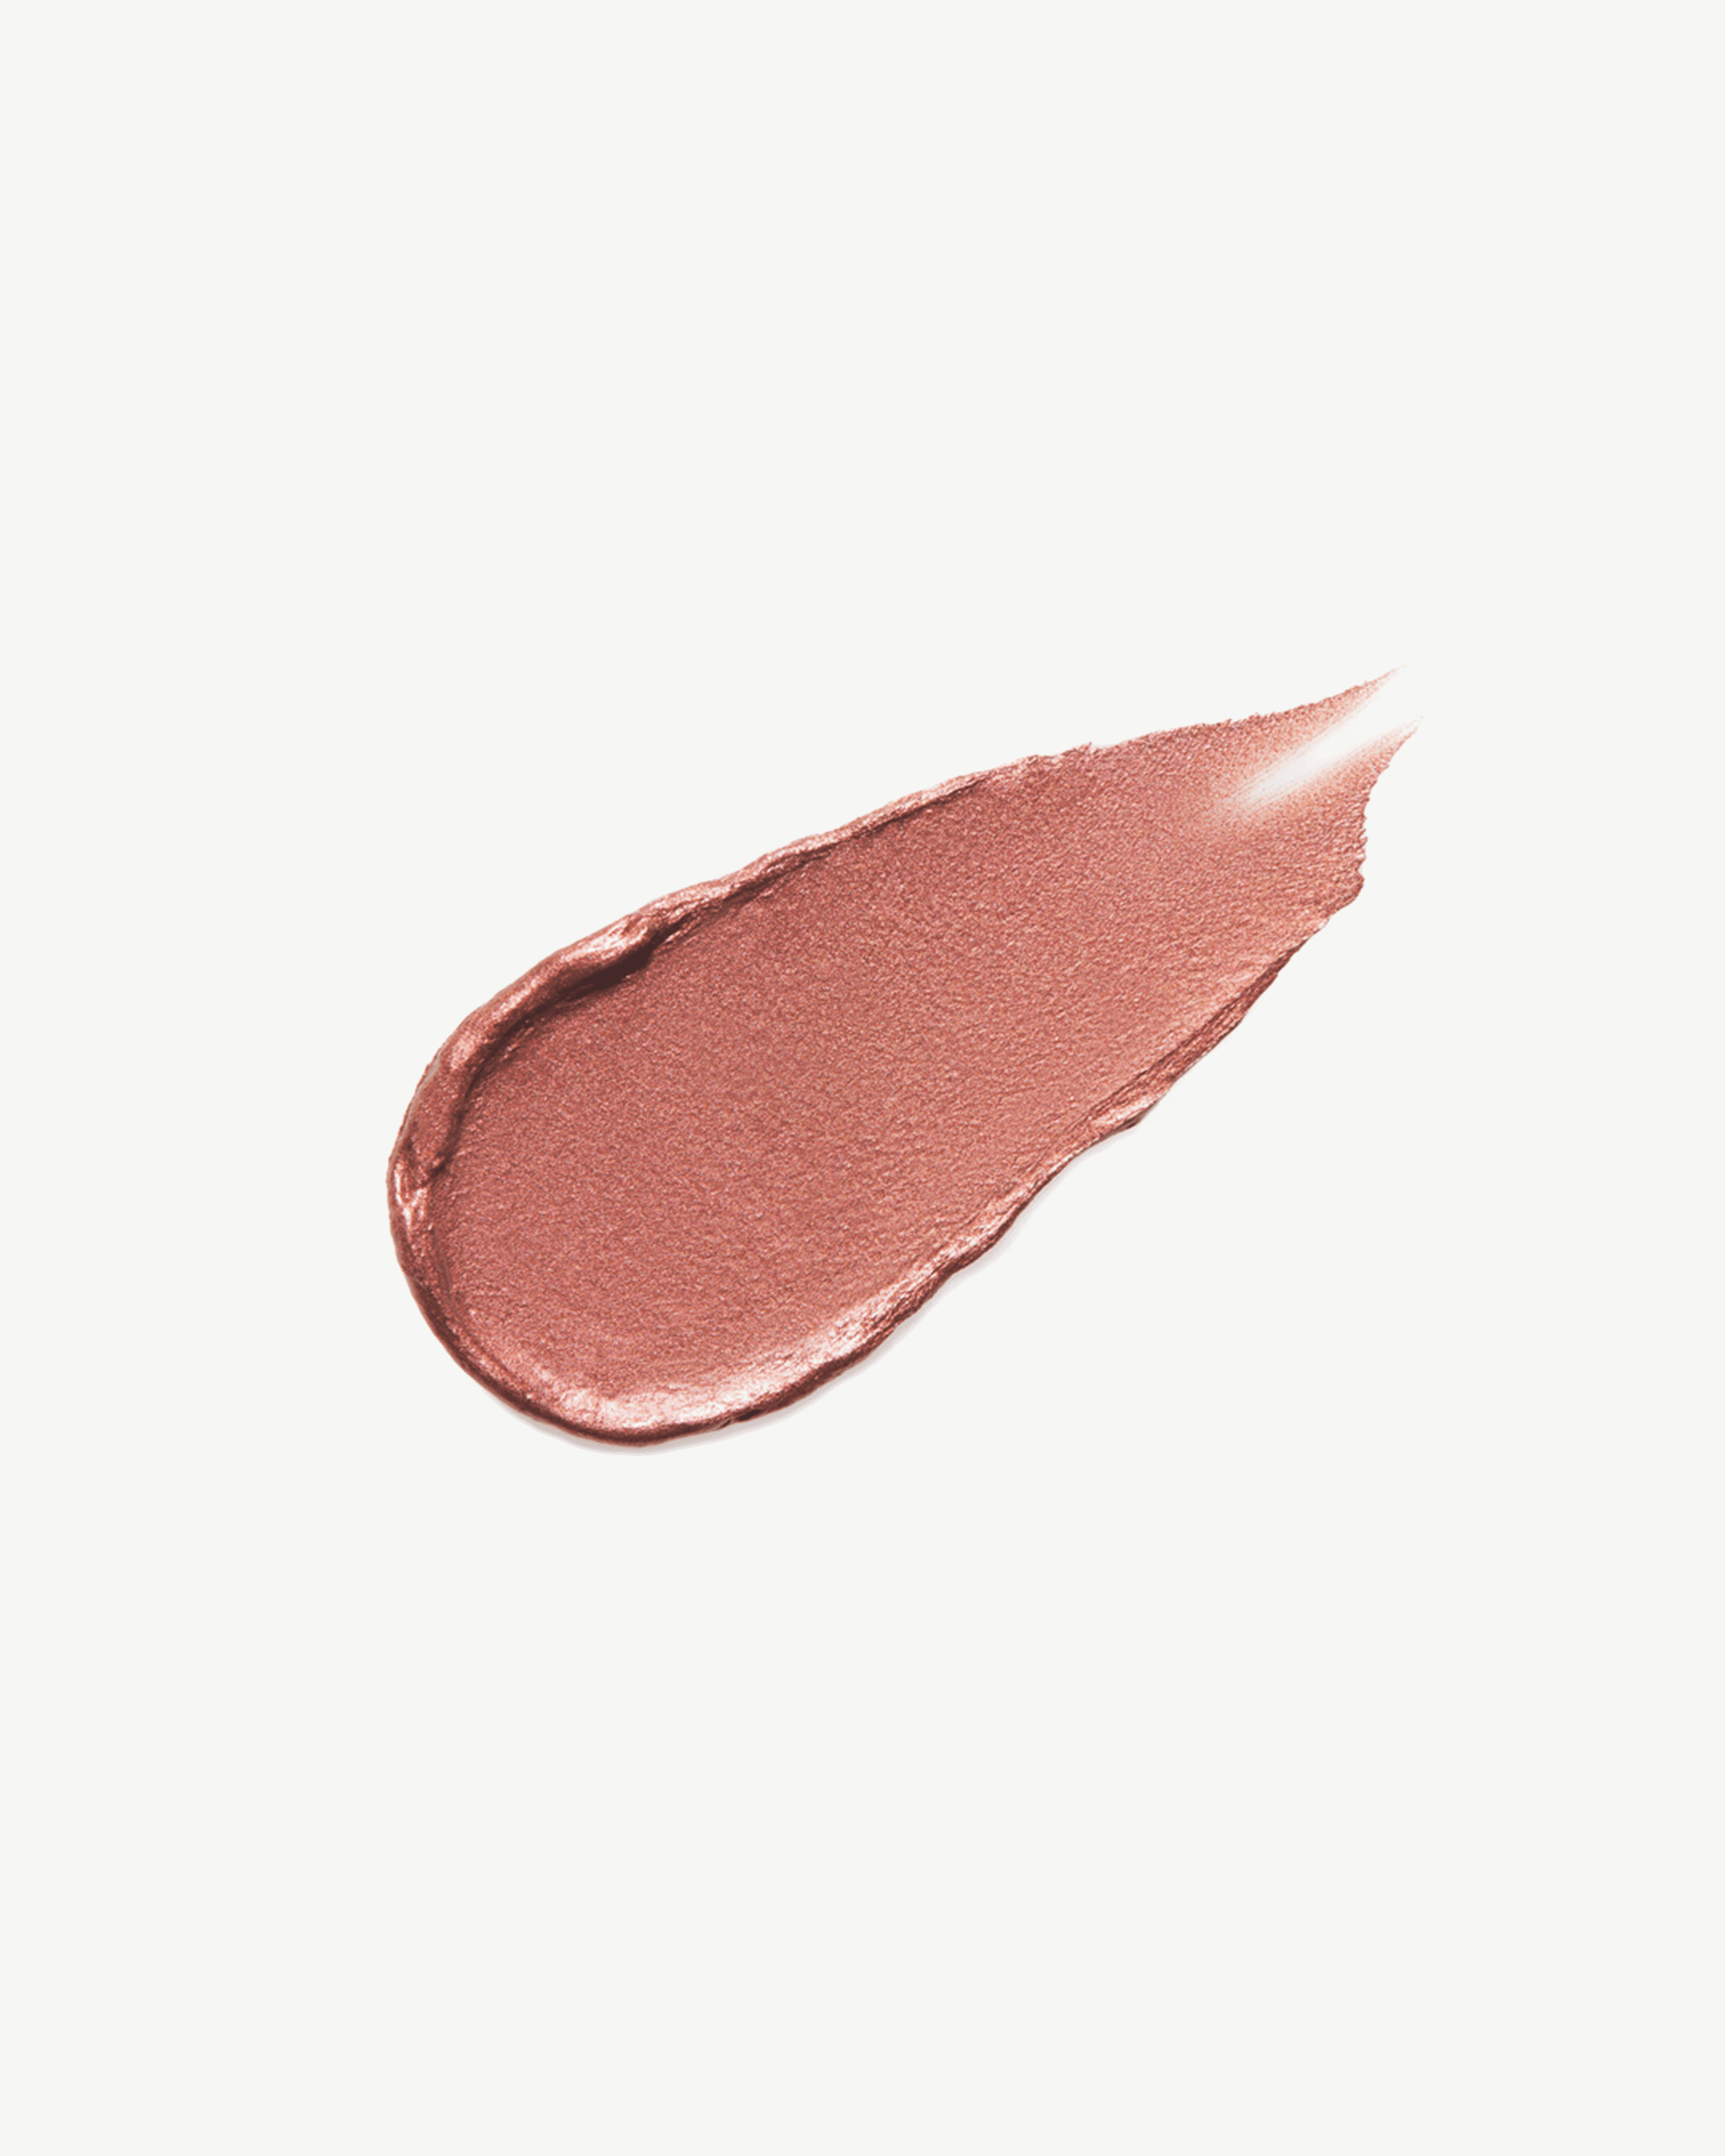 Spark (bronzed plum with a hint of violet)